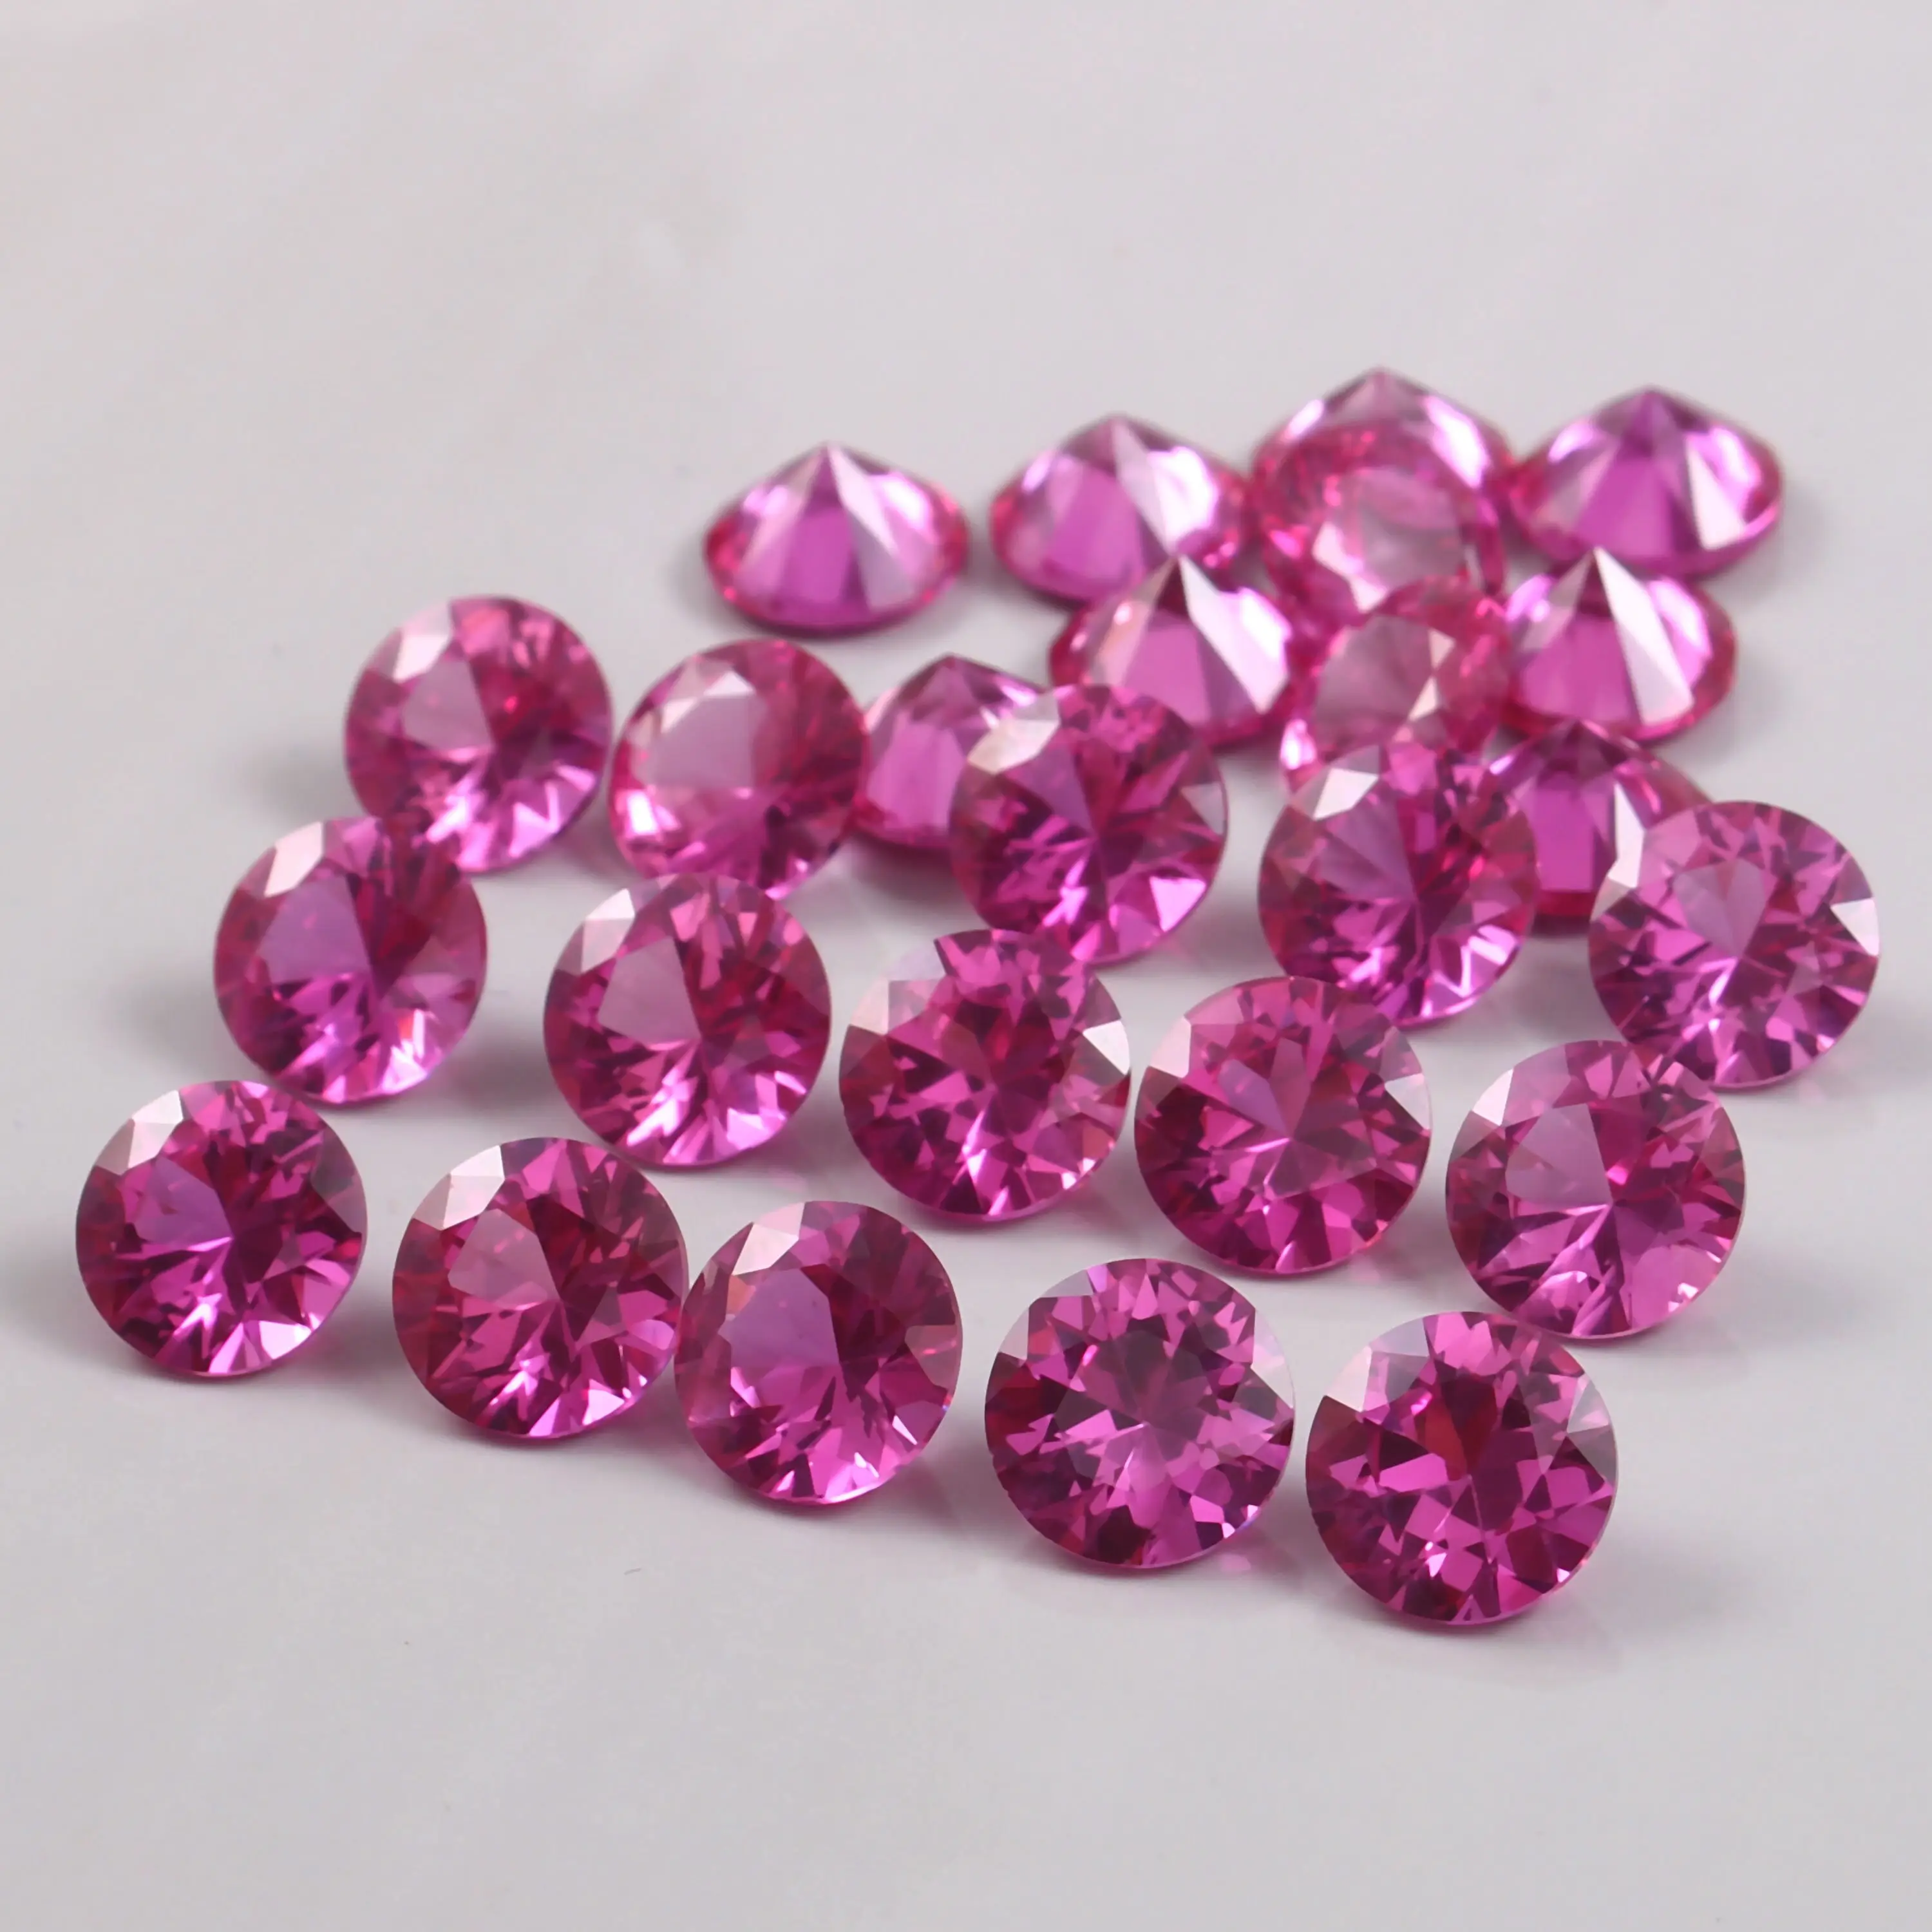 Lab Grown Pink Sapphire Loose Gemstone Making Jewelry For Women Girl Beautiful Gemstone Calibrated Size Available 5mm to 25mm